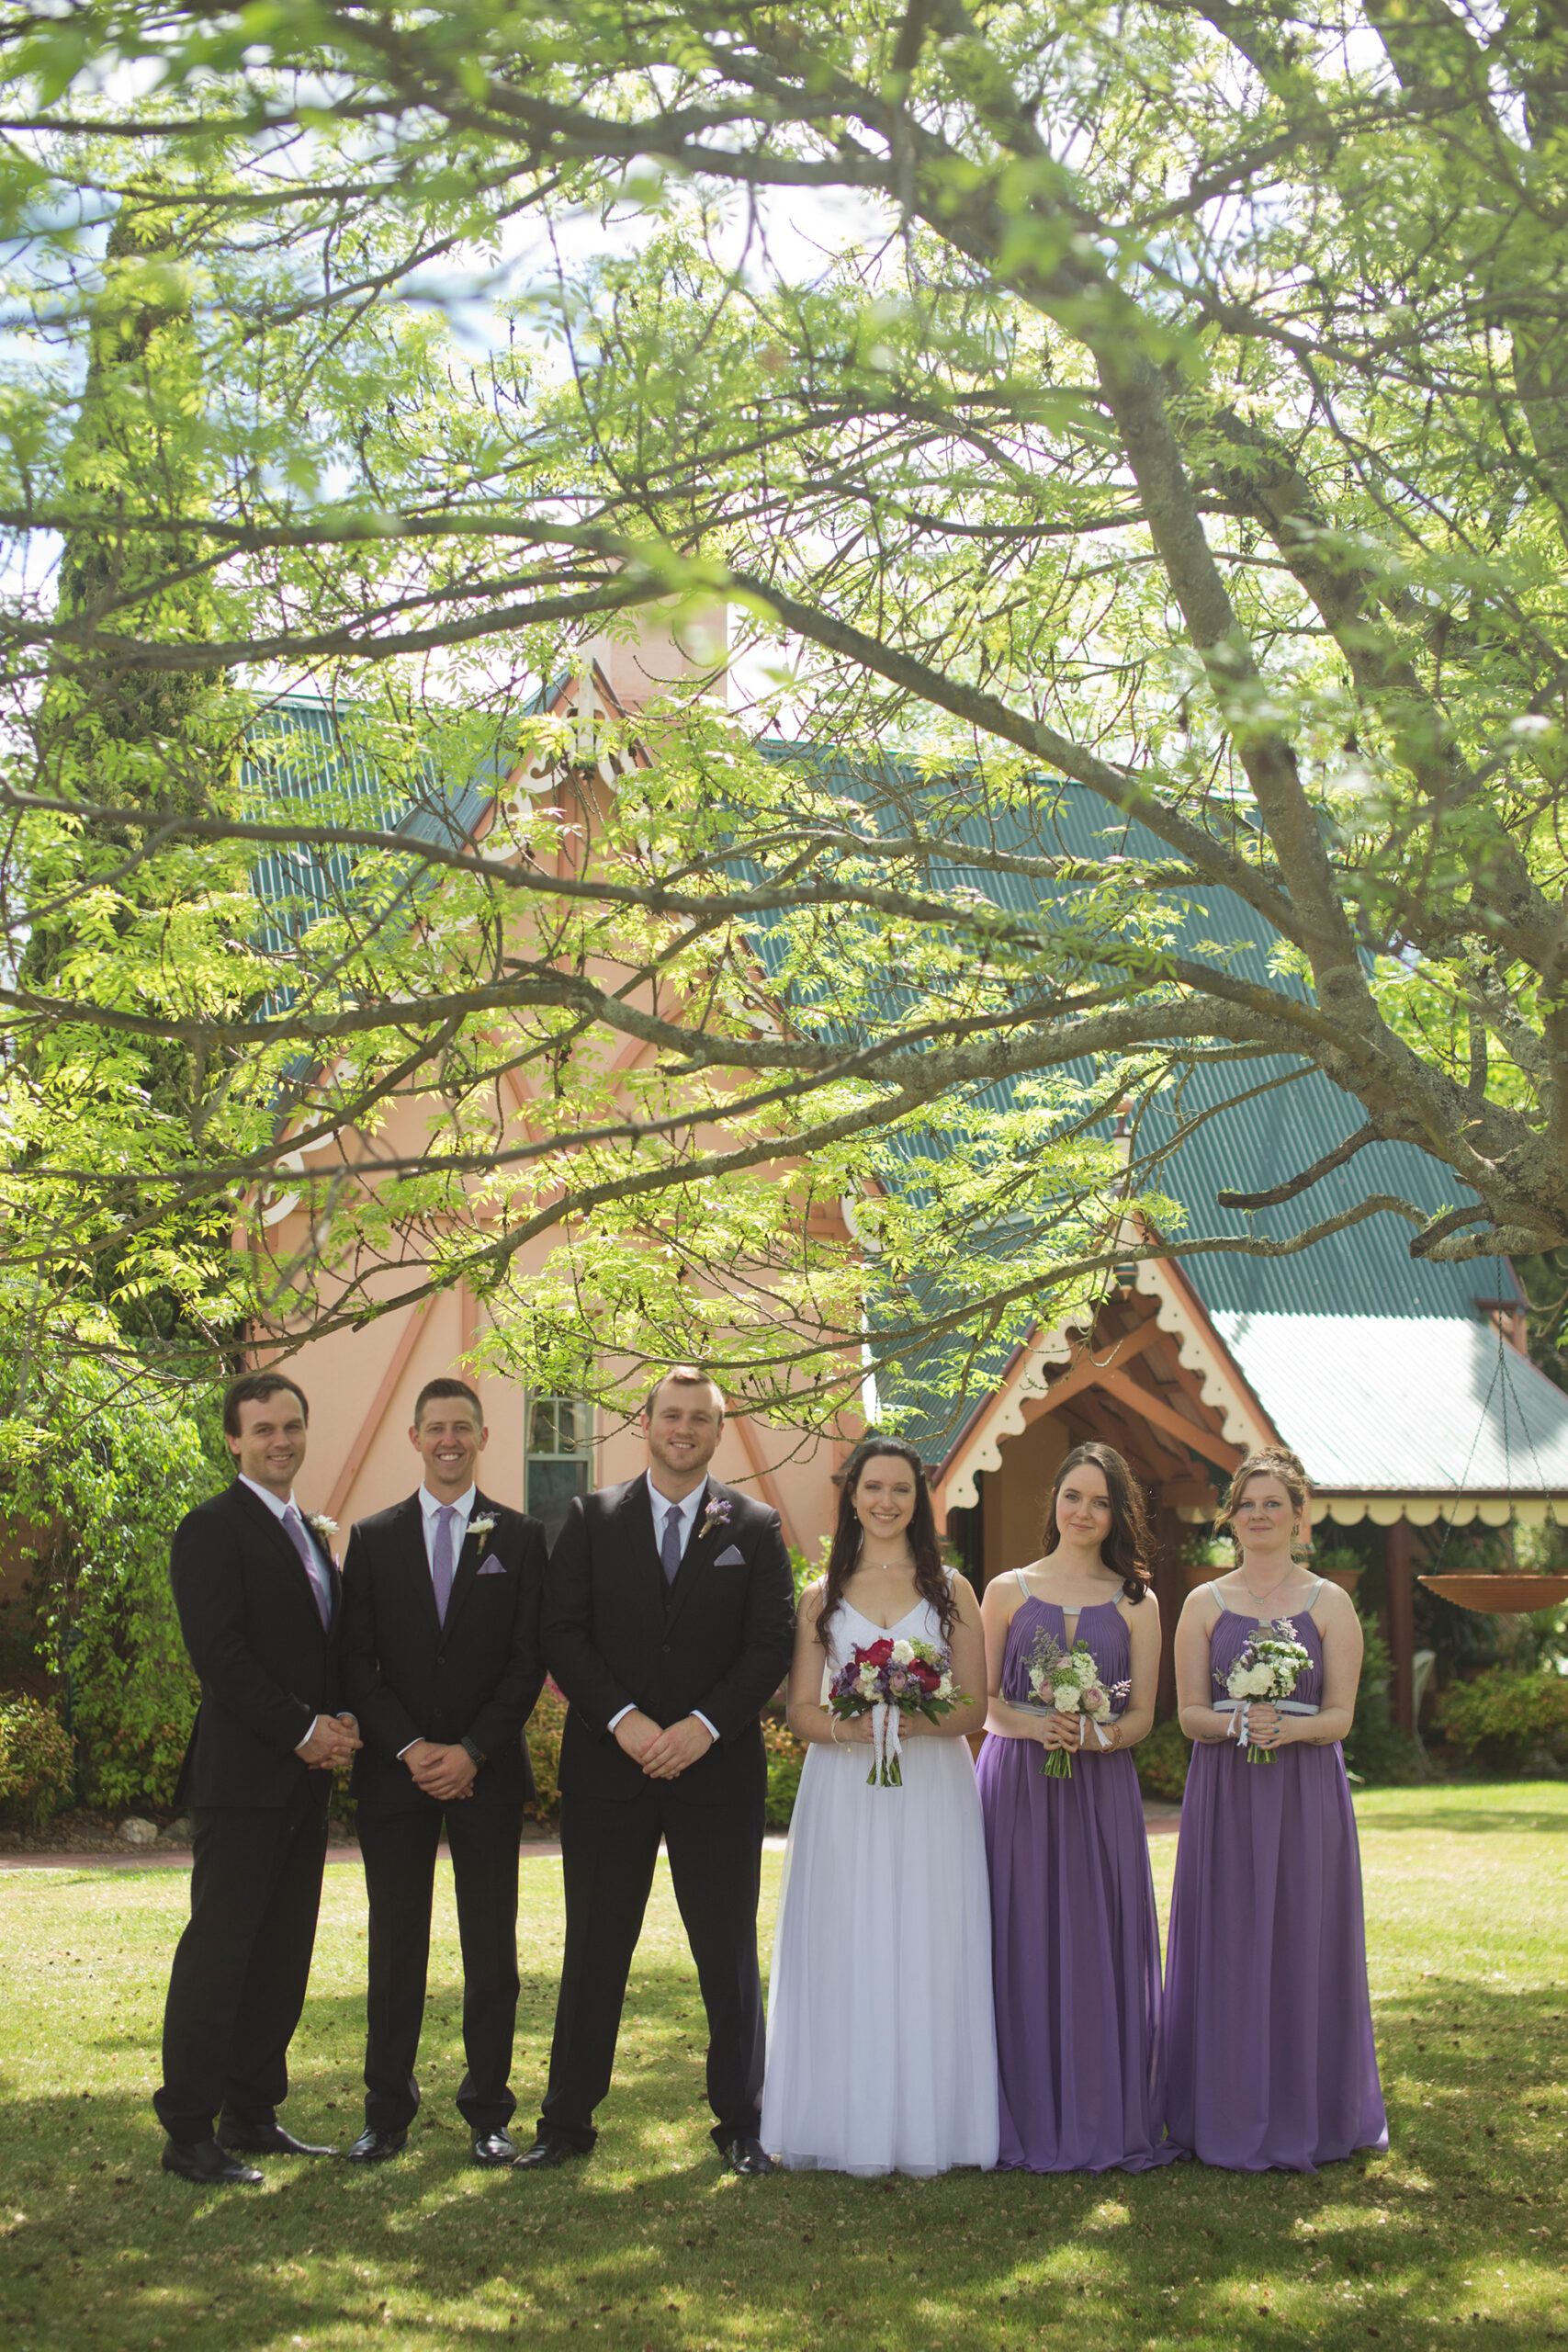 Ally_Clint_Country-Rustic-Wedding_009